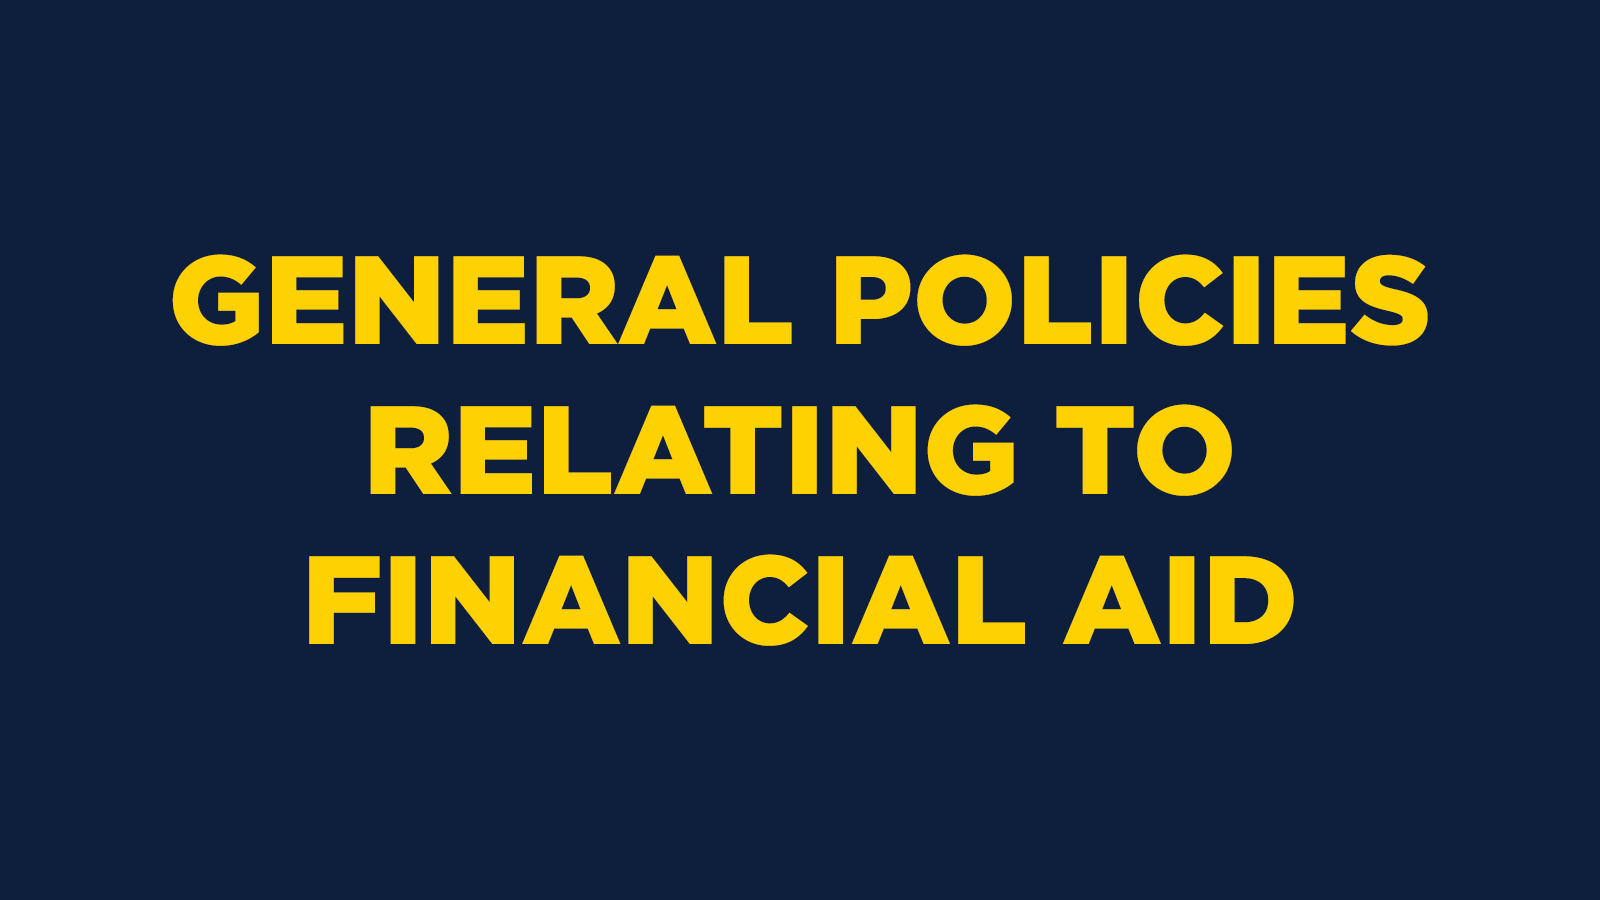 General Policies Relating To Financial Aid